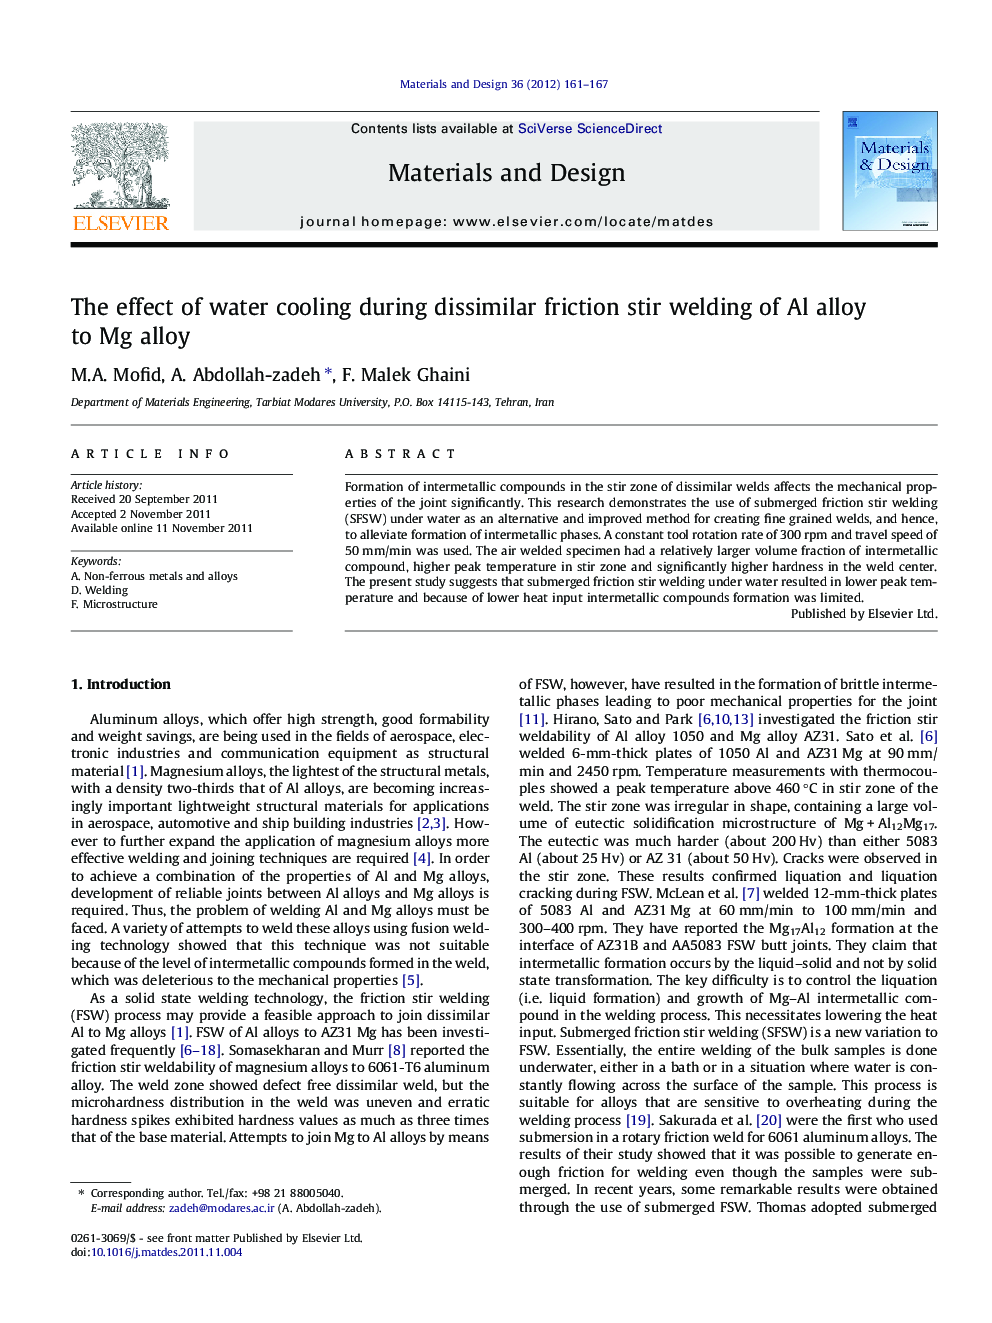 The effect of water cooling during dissimilar friction stir welding of Al alloy to Mg alloy